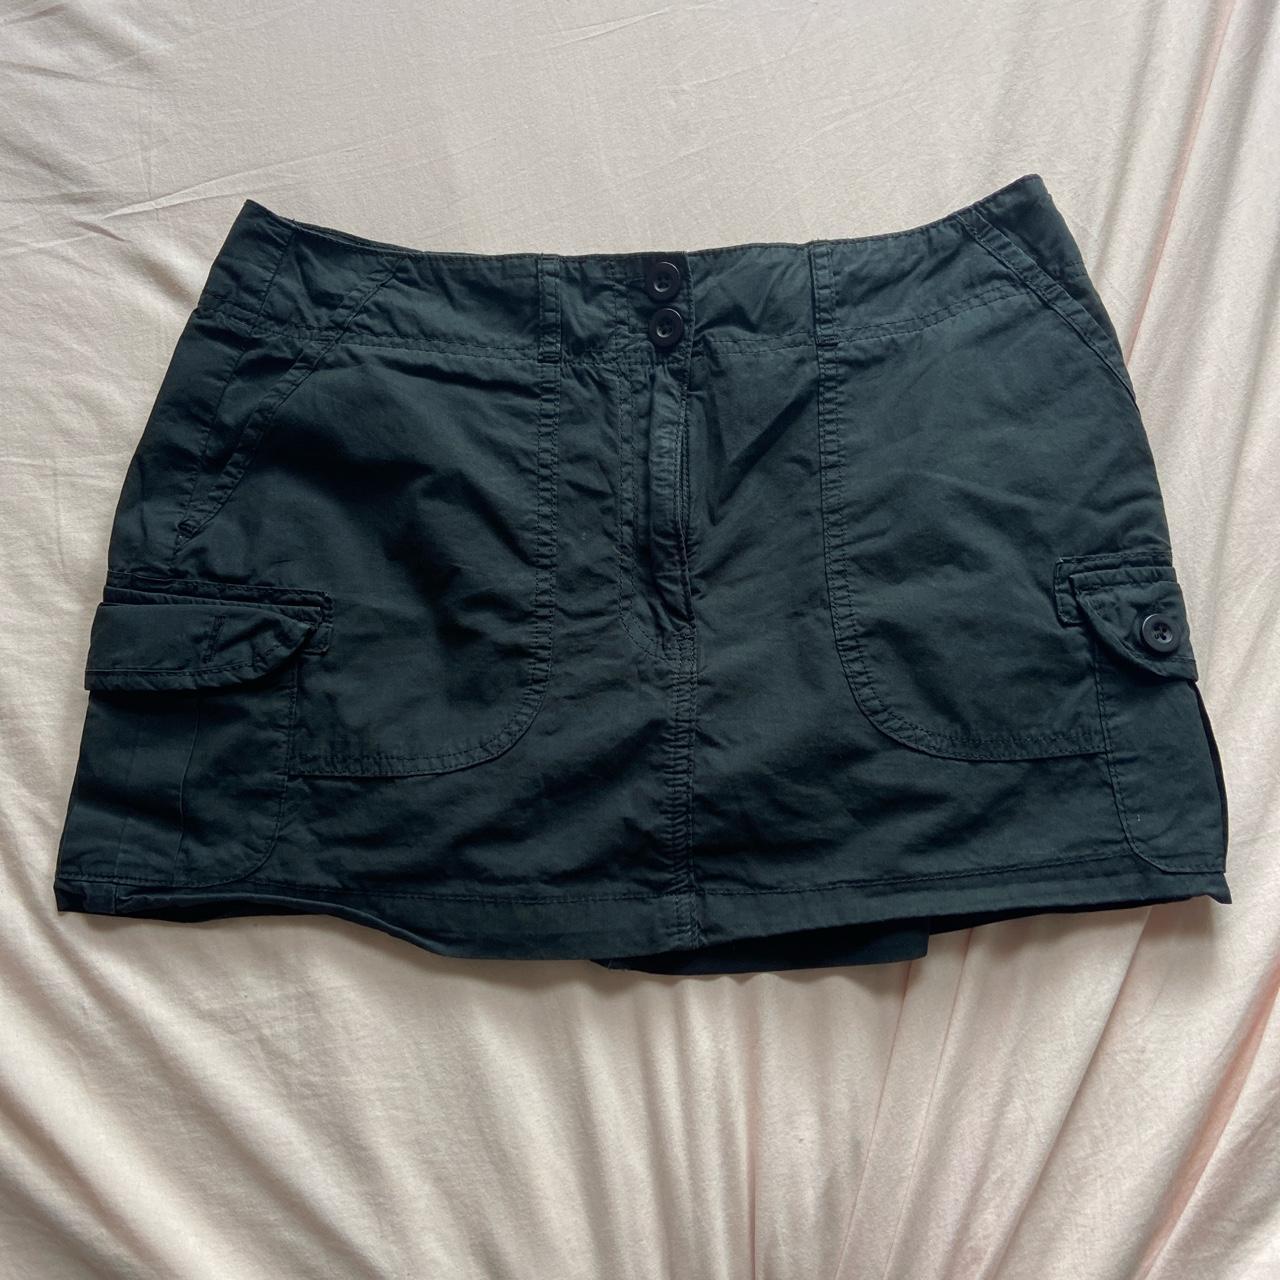 Black Glassons cargo skirt. Another great lil staple... - Depop